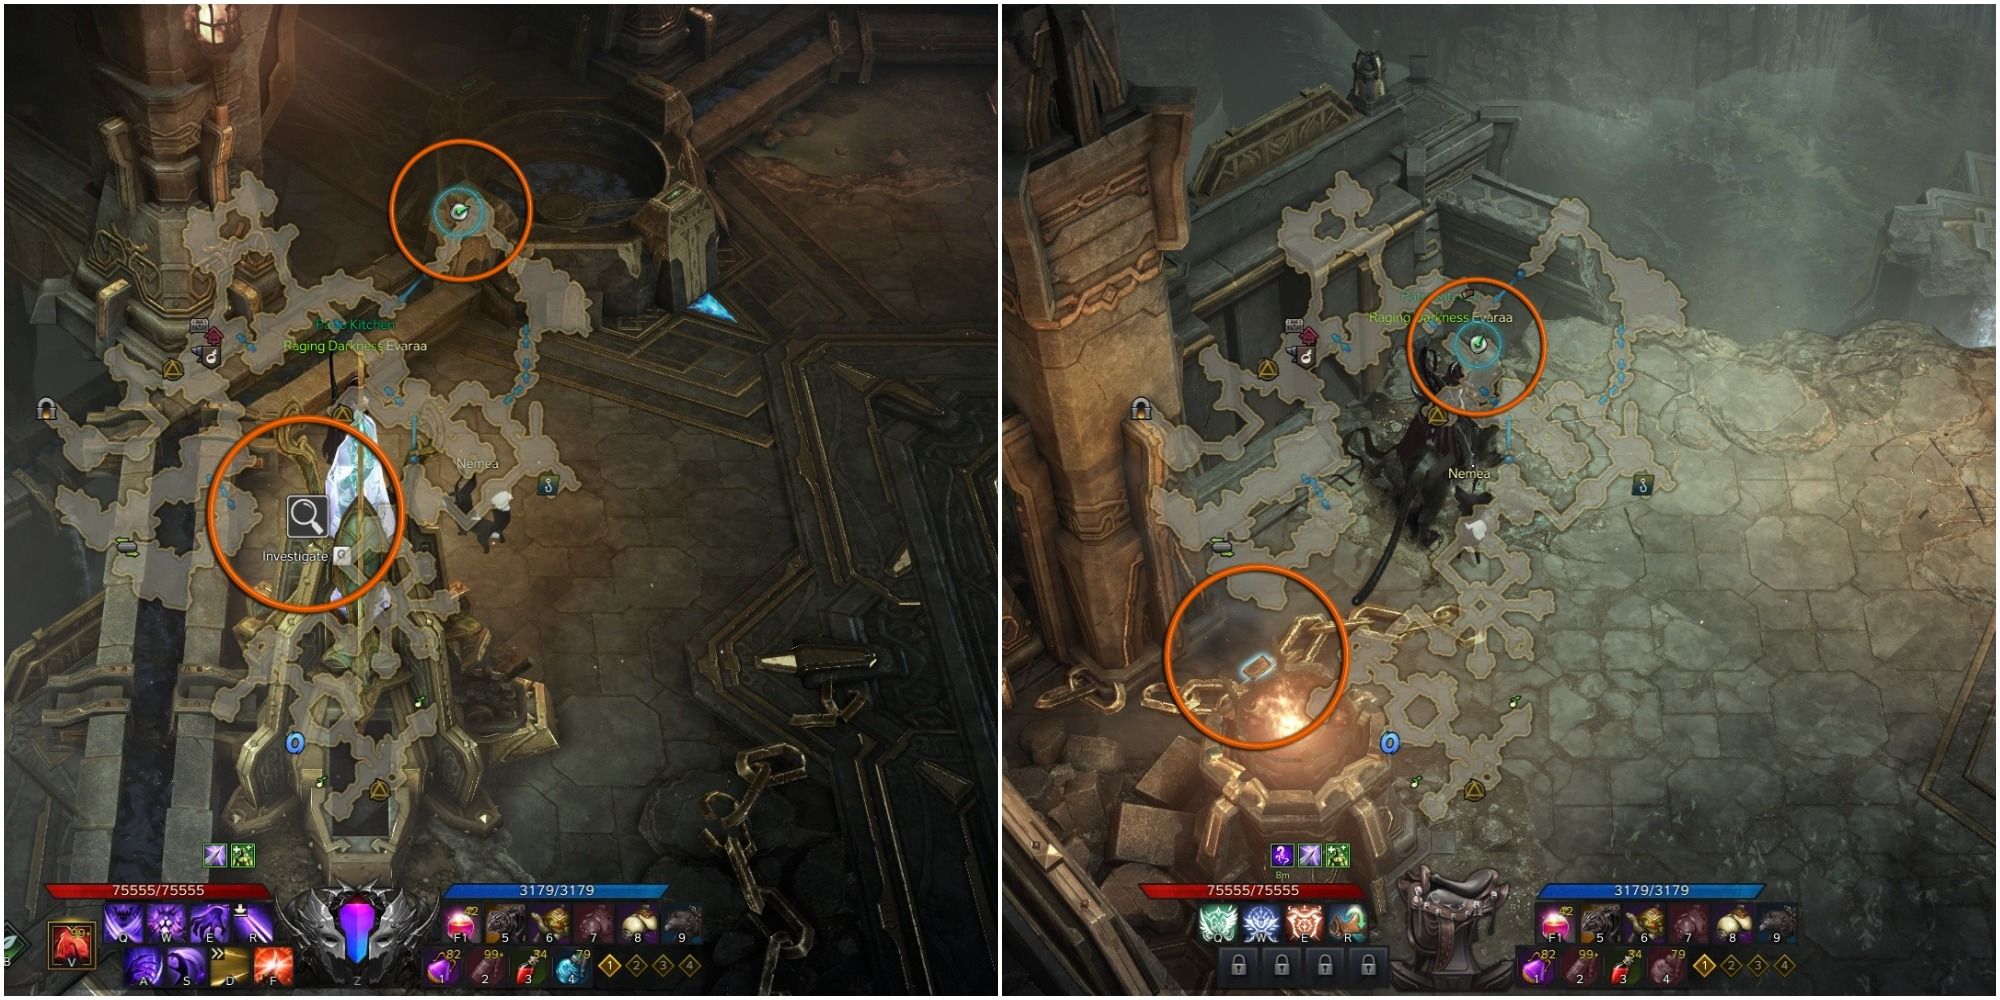 Lost Ark split image of Yorn's Hidden Story 7-1 and 7-2 locations with mini-maps open, orange circles around objects and player icons